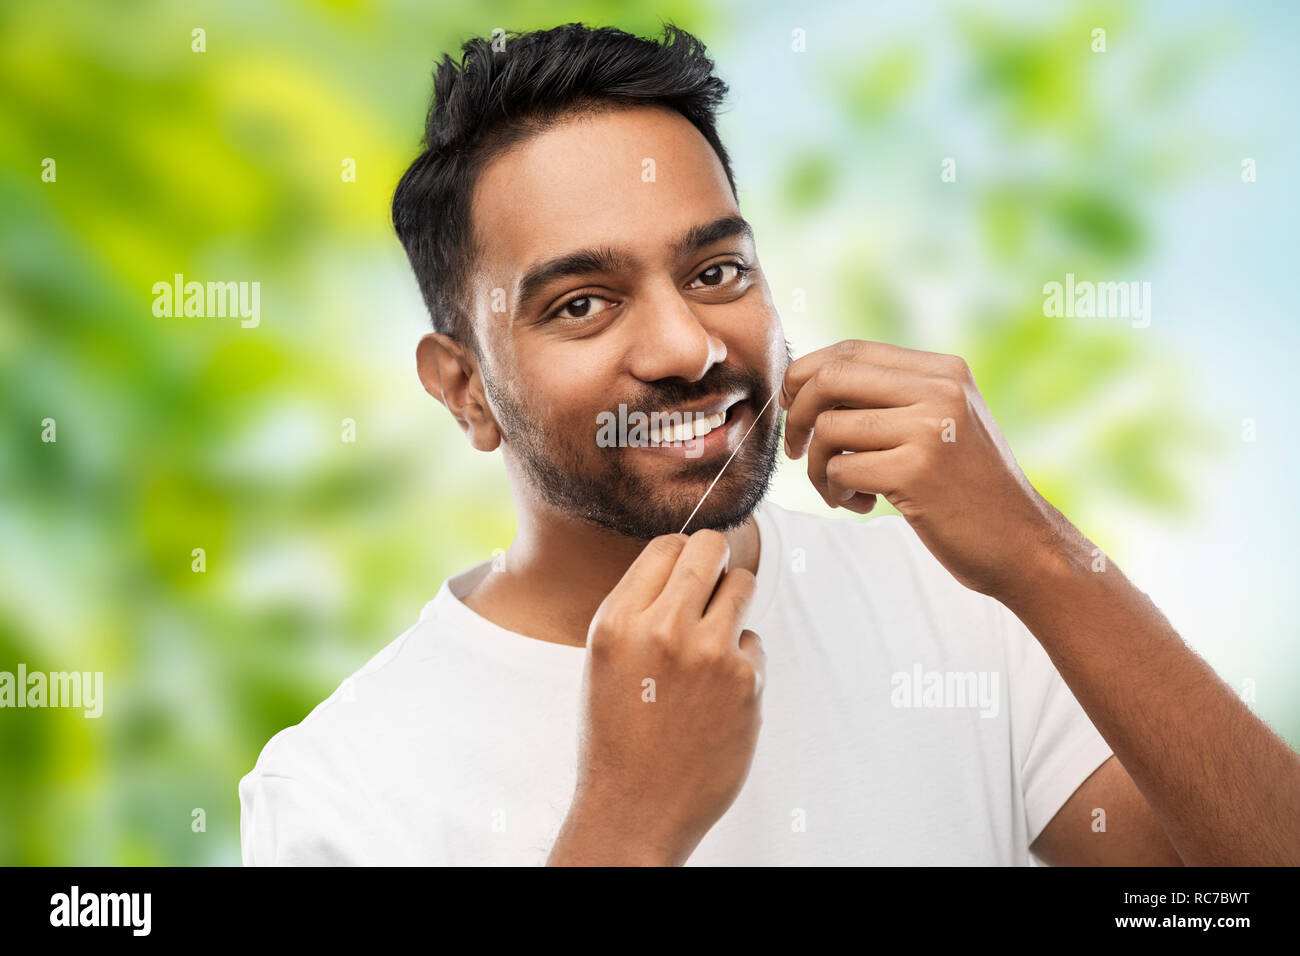 indian man with dental floss cleaning teeth Stock Photo